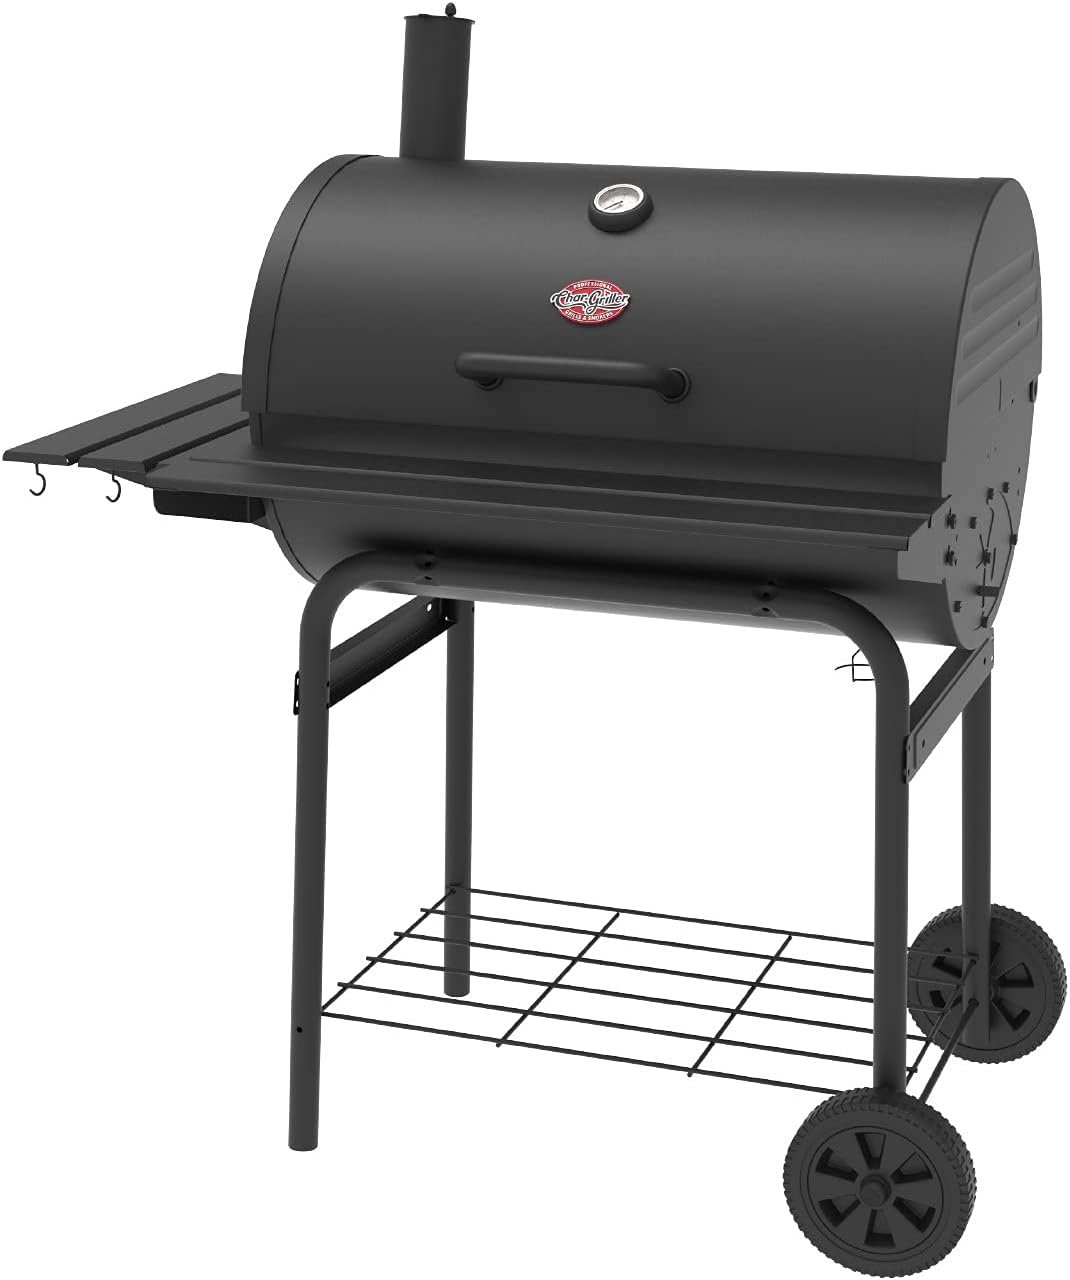 Char-Griller E2828 Pro Deluxe Charcoal Grill Review